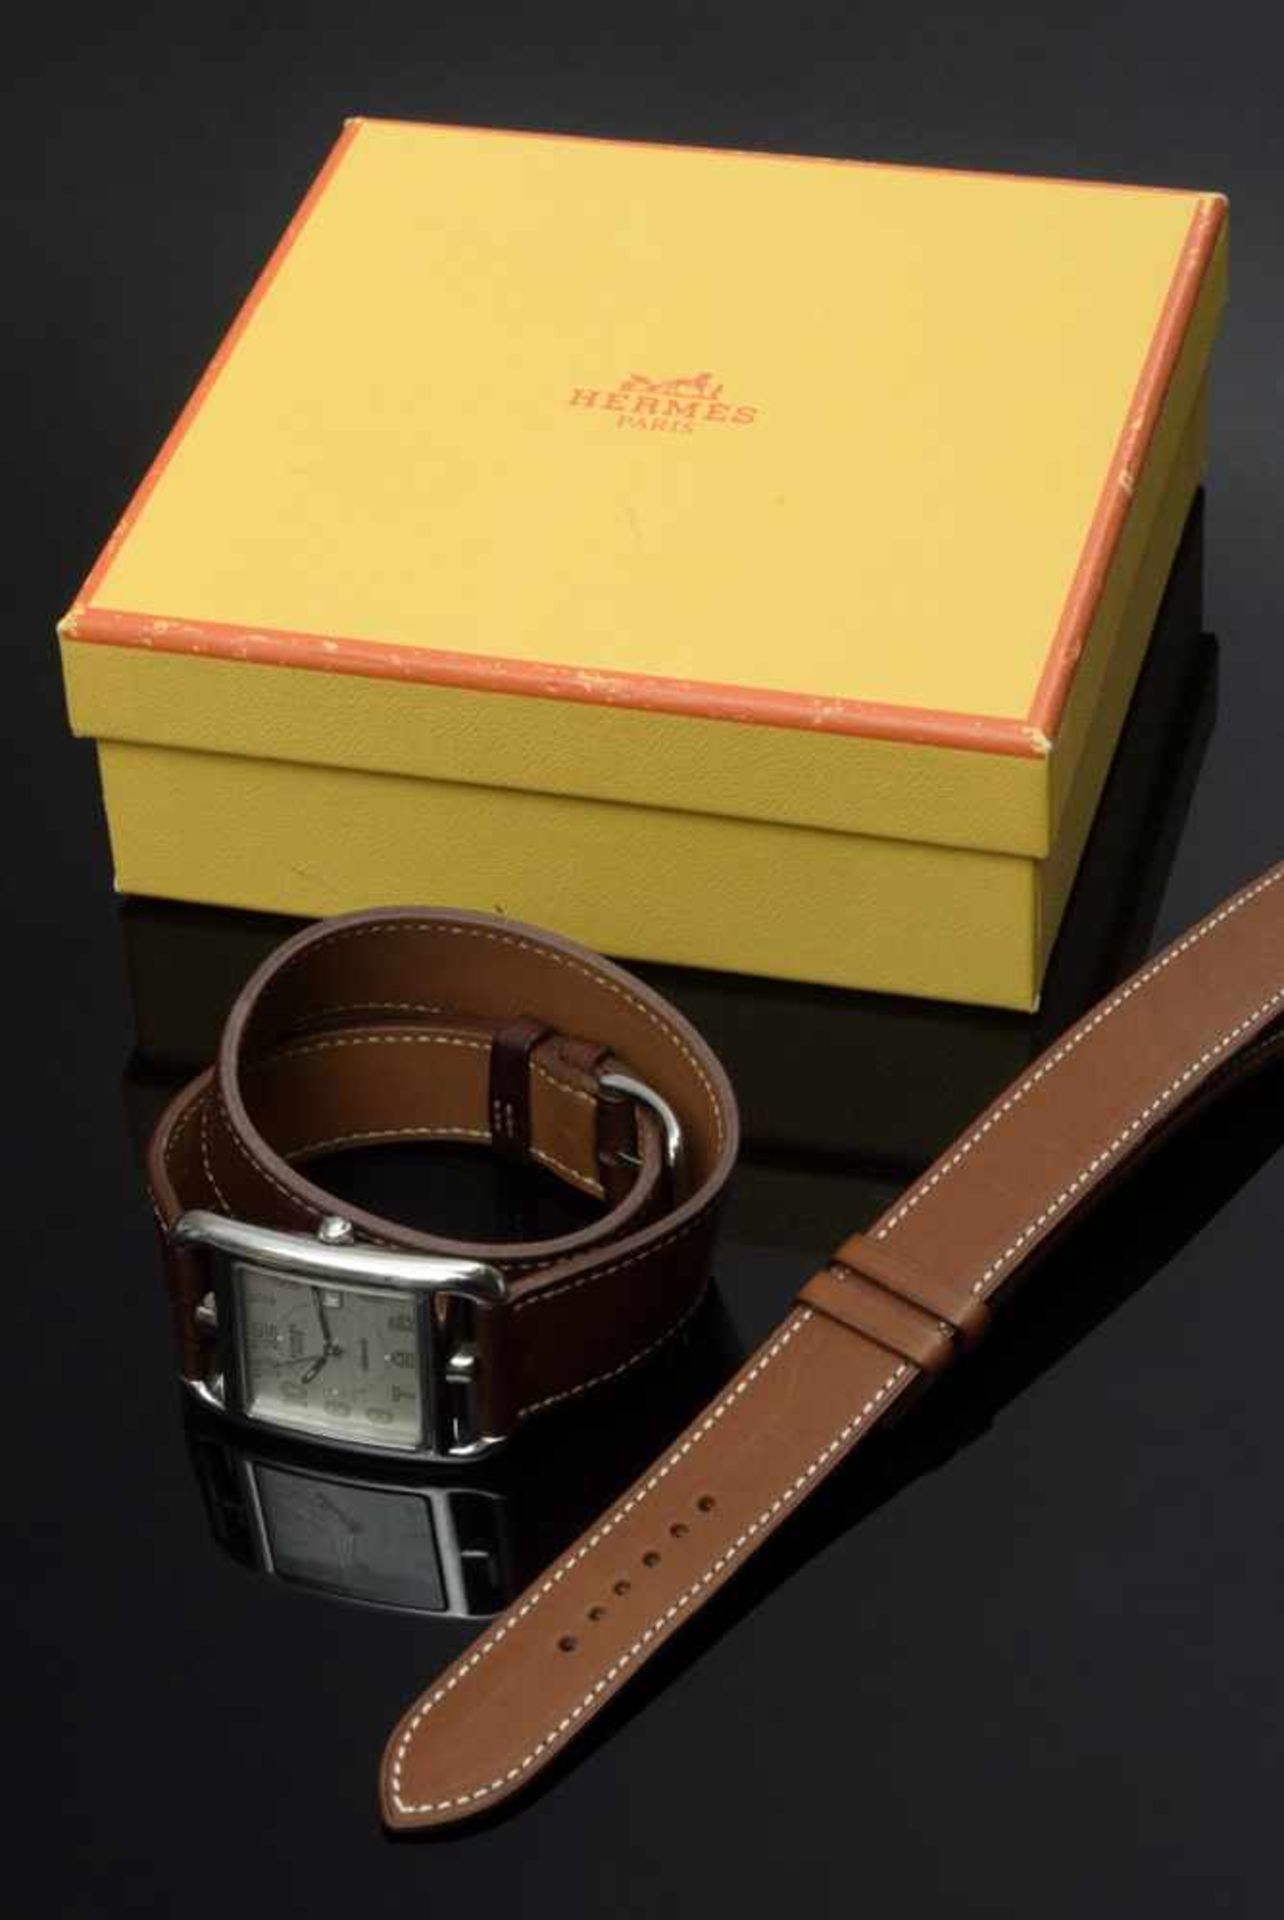 Sporty Hermès "Cape Cod" ladies' watch, stainless steel, automatic movement, date, central second - Image 5 of 5